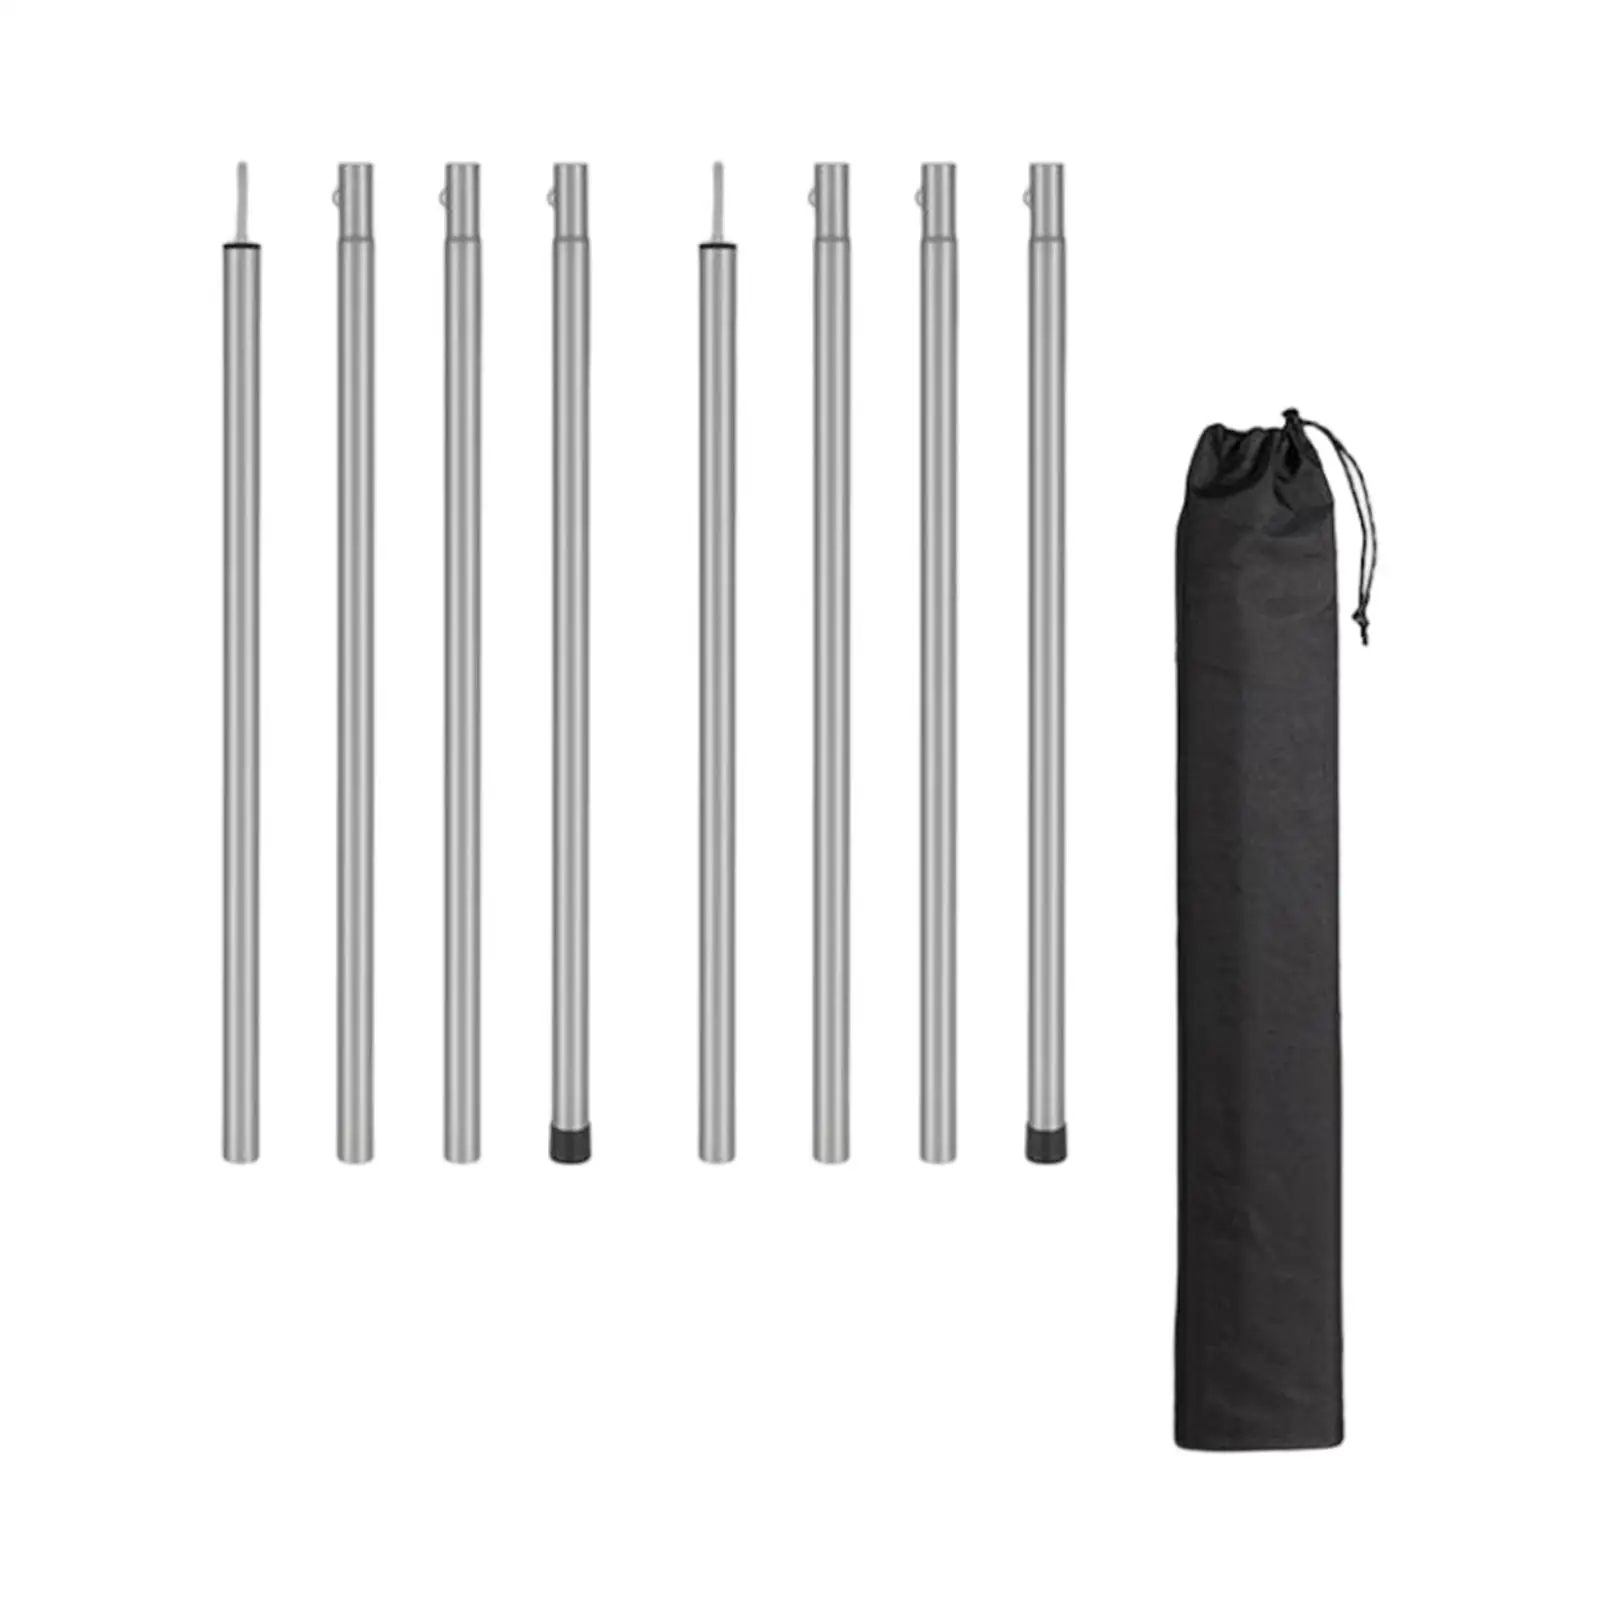 Tent Poles Canopy Pole Removable Length Adjustable Awning Support Support Rods